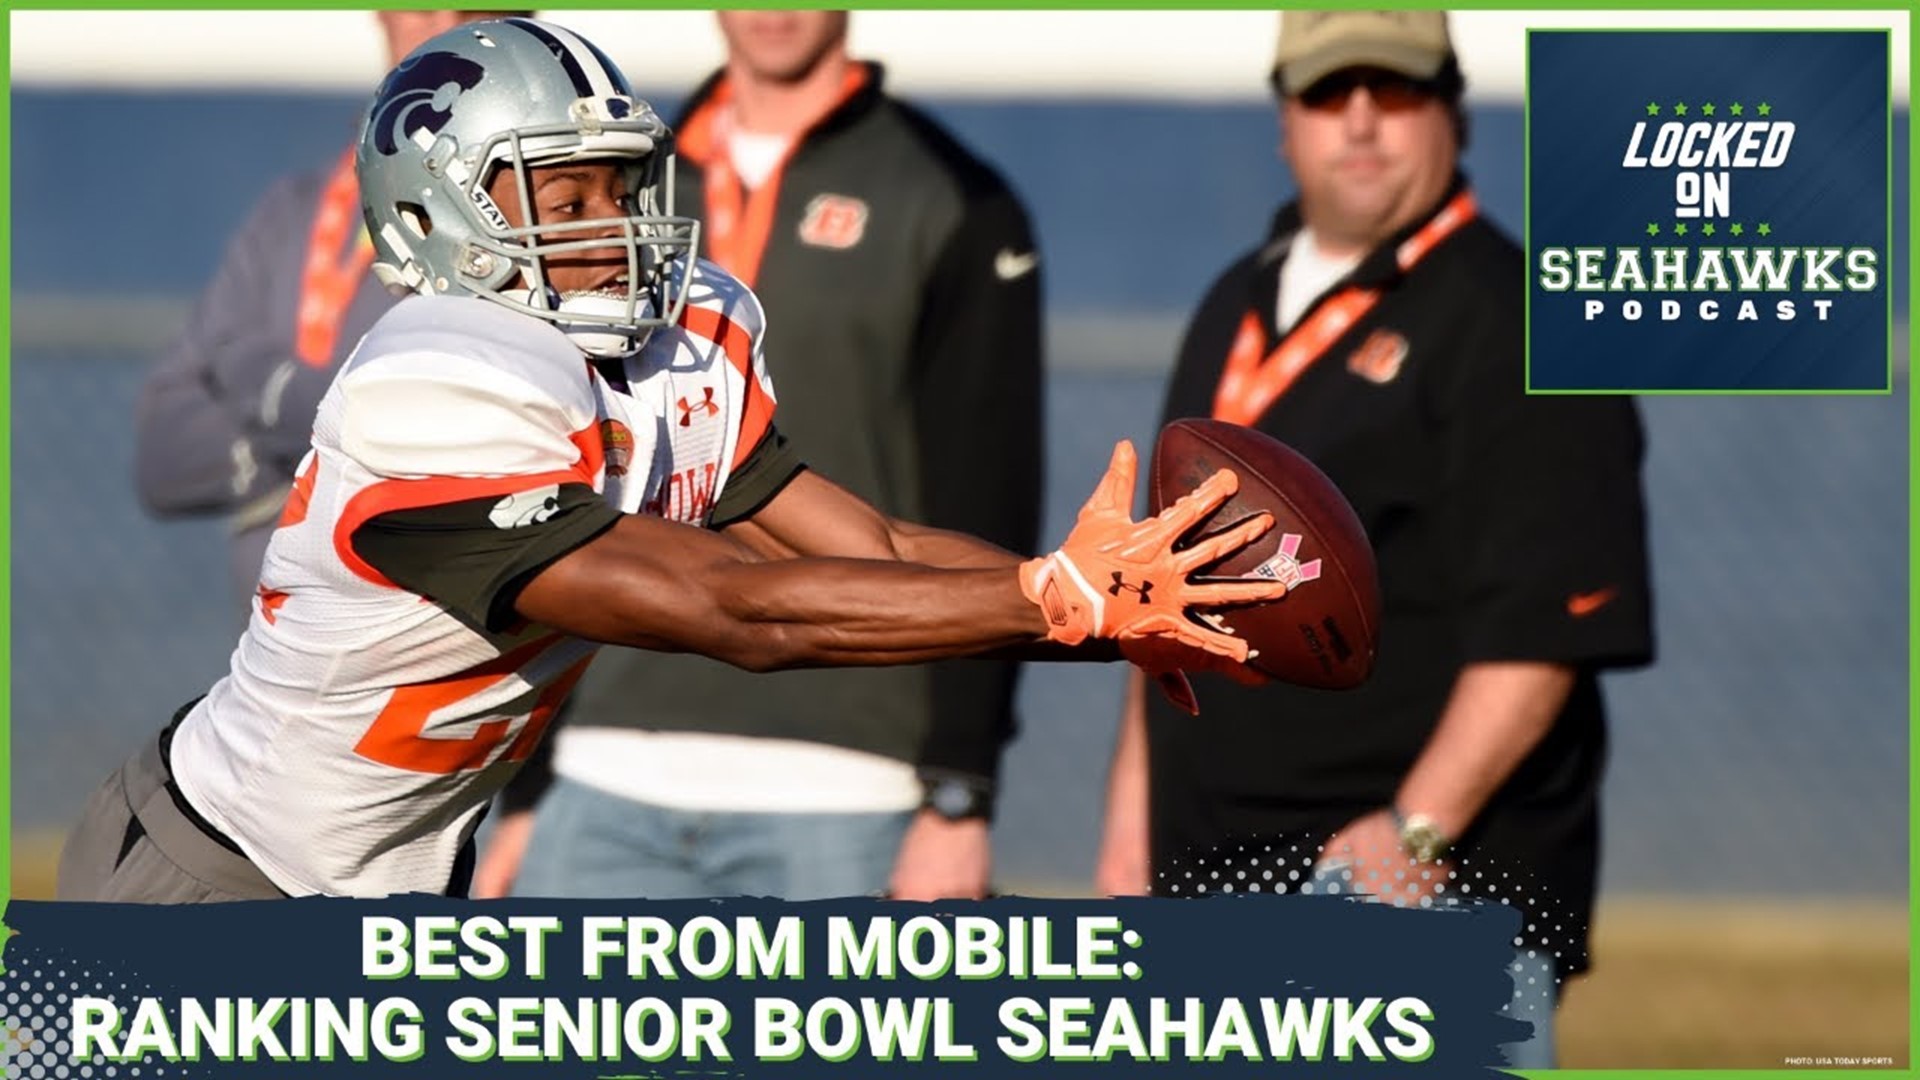 Host Corbin Smith looks back at Seattle's best Senior Bowl draft picks over the years, including landing two future Hall of Famers in 2012, and more.